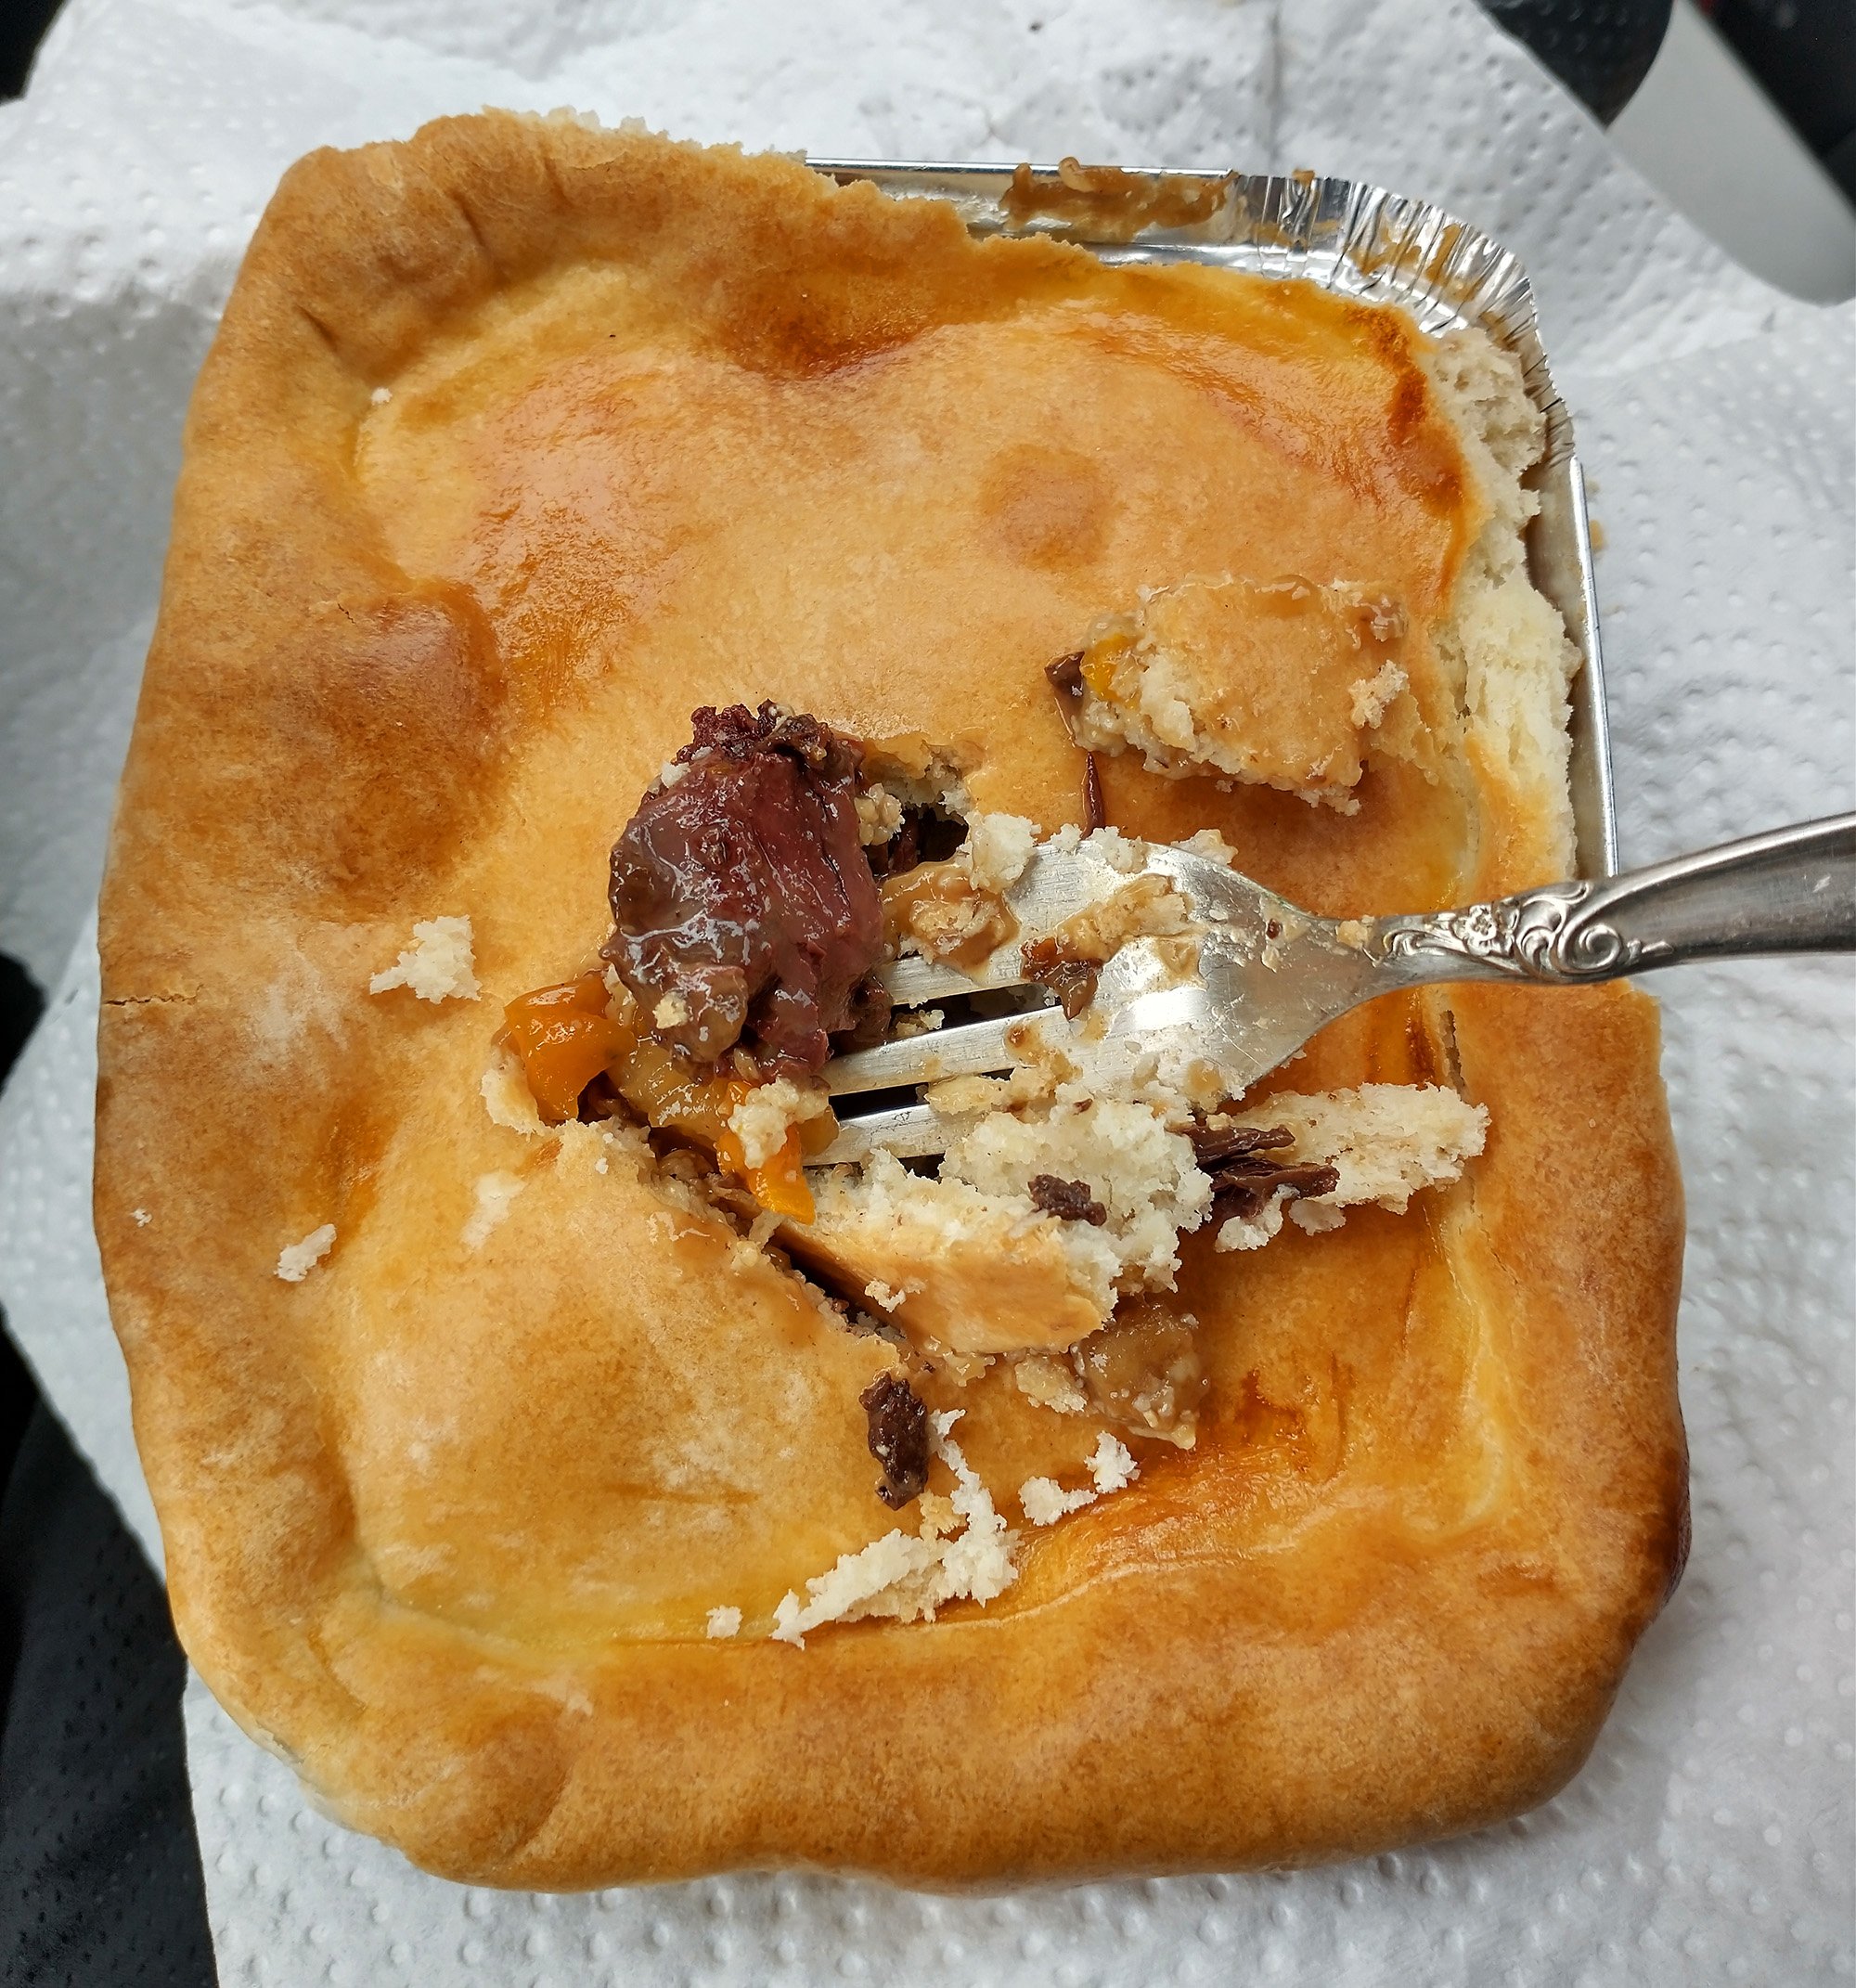 Why is this called a "Flipper" pie, you may ask? Because it's made with sea flippers. It's basically a beef pot pie but replace the beef with flippers.... 